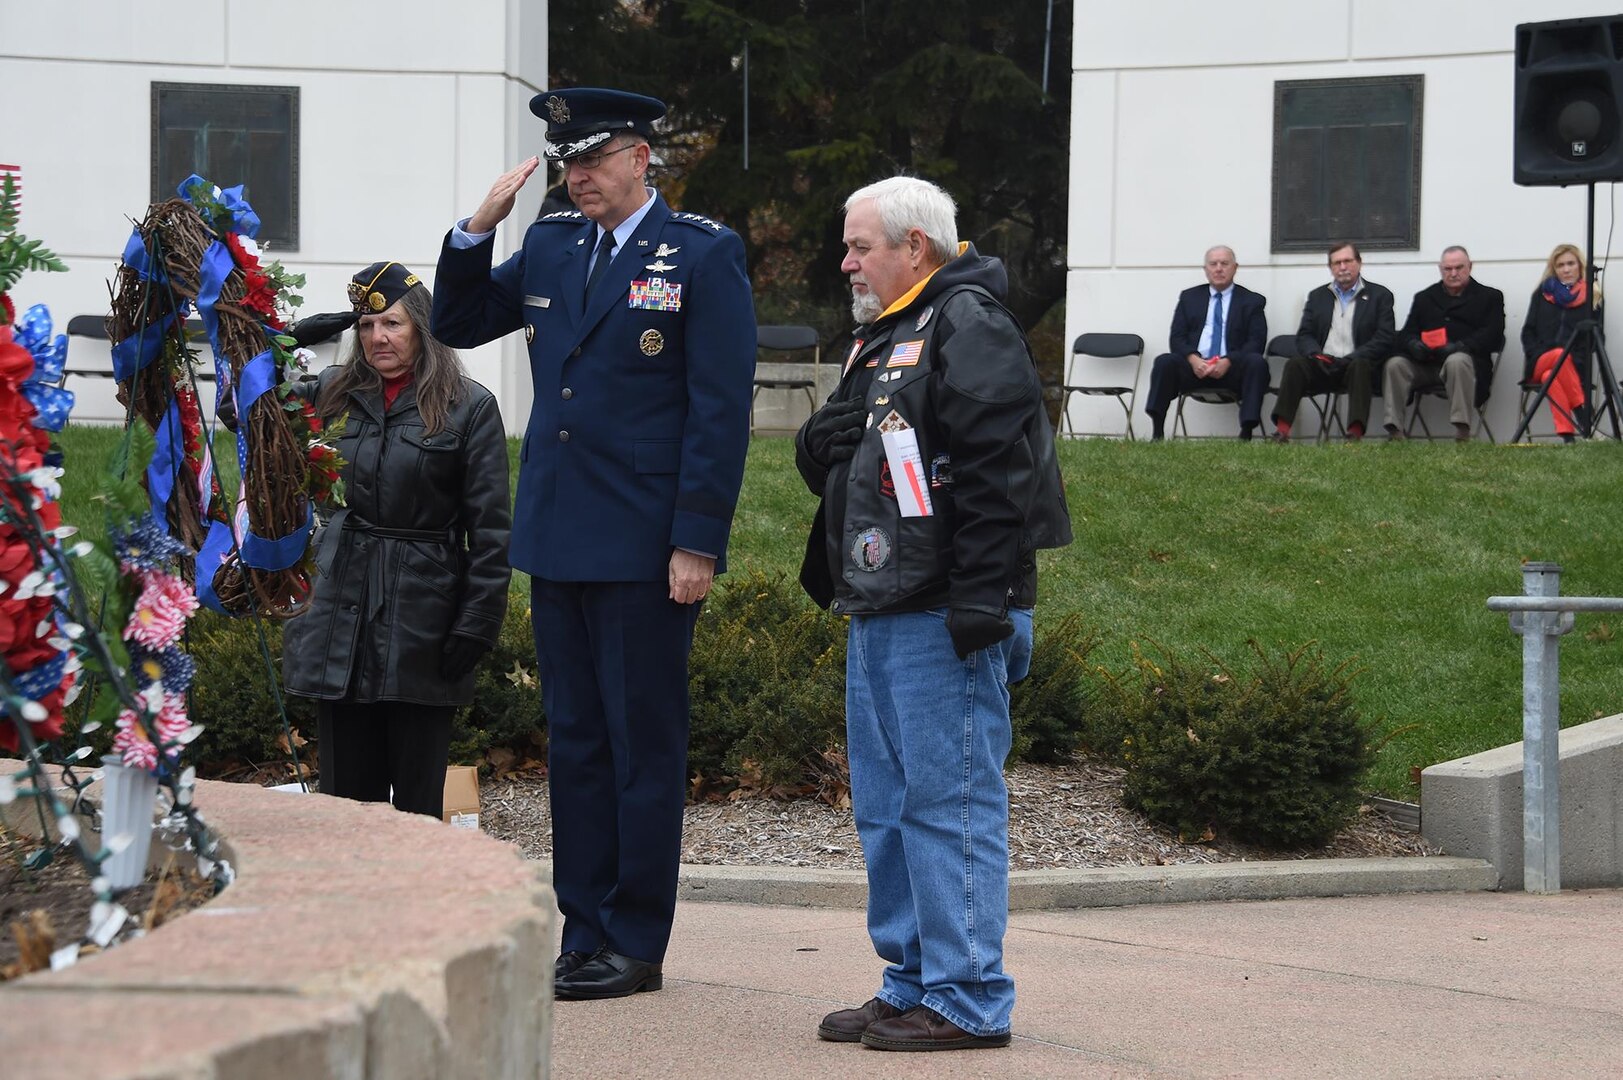 U.S. Air Force Gen. John Hyten, commander of U.S. Strategic Command, and Lonnie Ford, a Gold Star father, pay respects after placing a wreath to honor the sacrifice of American veterans during a Veterans Day ceremony at Memorial Park in Omaha, Neb., Nov. 11, 2017. Ford’s son, U.S. Army Sgt. Joshua Ford, was killed July 31, 2000, during combat operations in Al Numaniyah, Iraq. More than 200 people attended the ceremony to recognize the service of American veterans and their families.